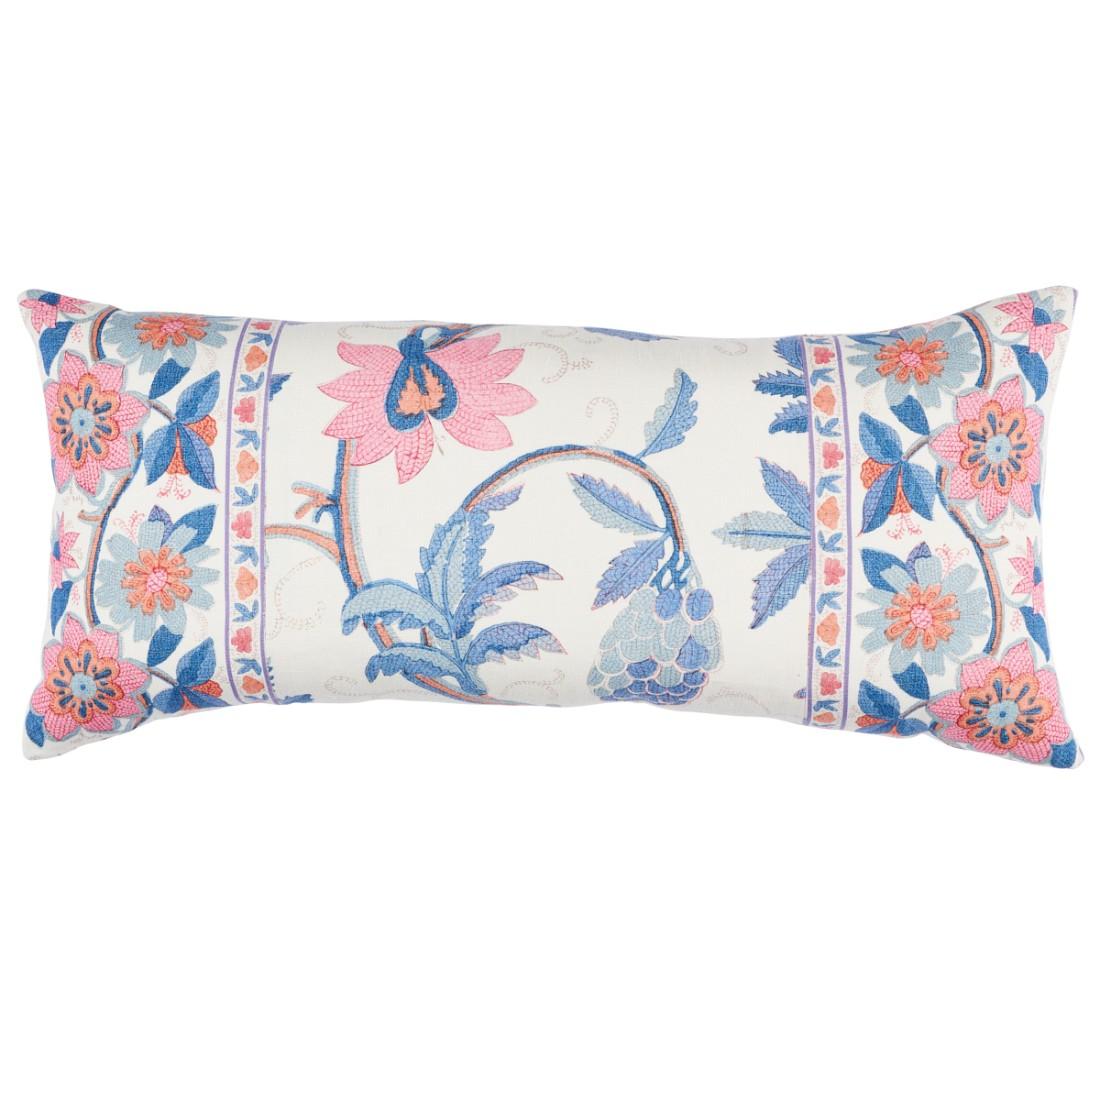 This pillow features Indali Bordered Linen with a knife edge finish. The unique beauty of Indali Linen in rose-and-indigo lies in its faithful interpretation of the original 1920s block-printed pattern. Twisted floral vines are alive with tiny